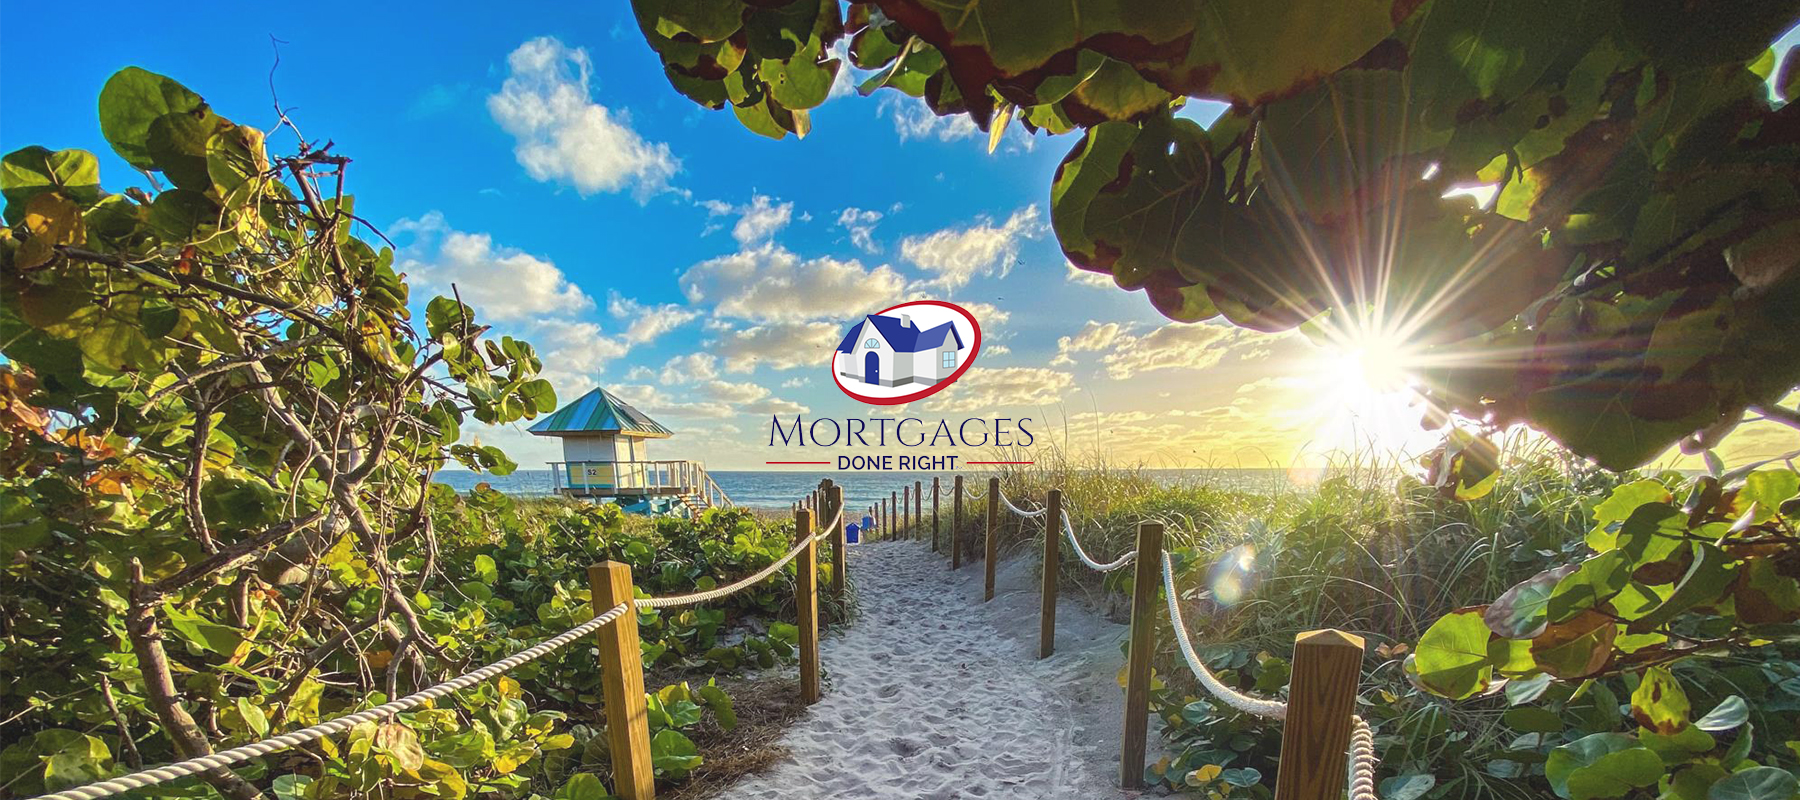 Delray Beach Mortgage Experts